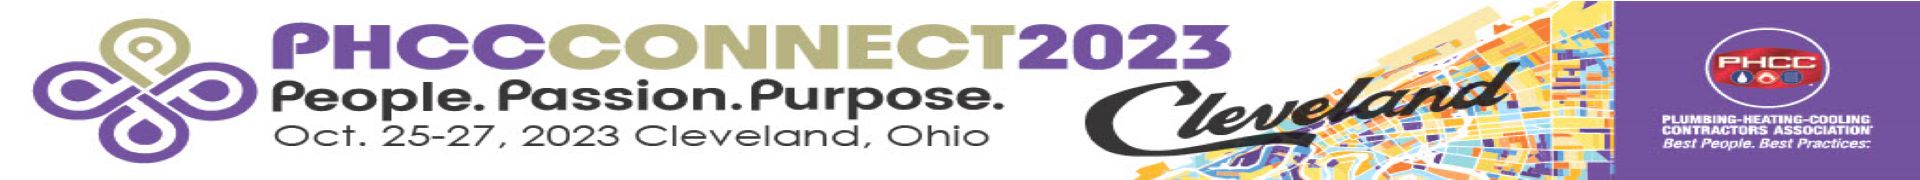 2023 PHCC CONNECT Event Banner